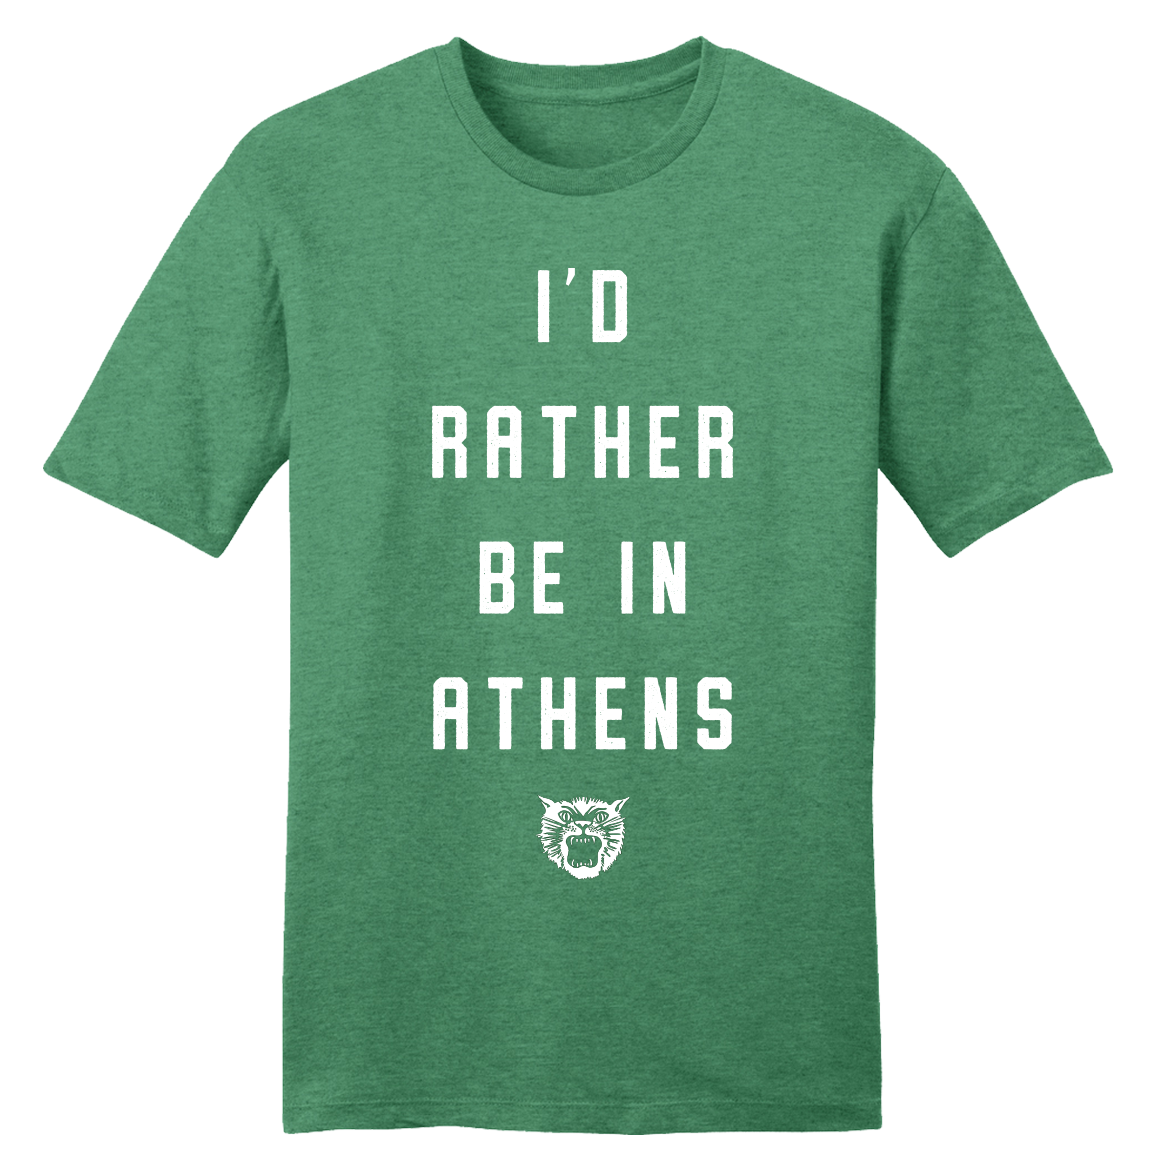 Ohio University I'd Rather Be In Athens - Cincy Shirts